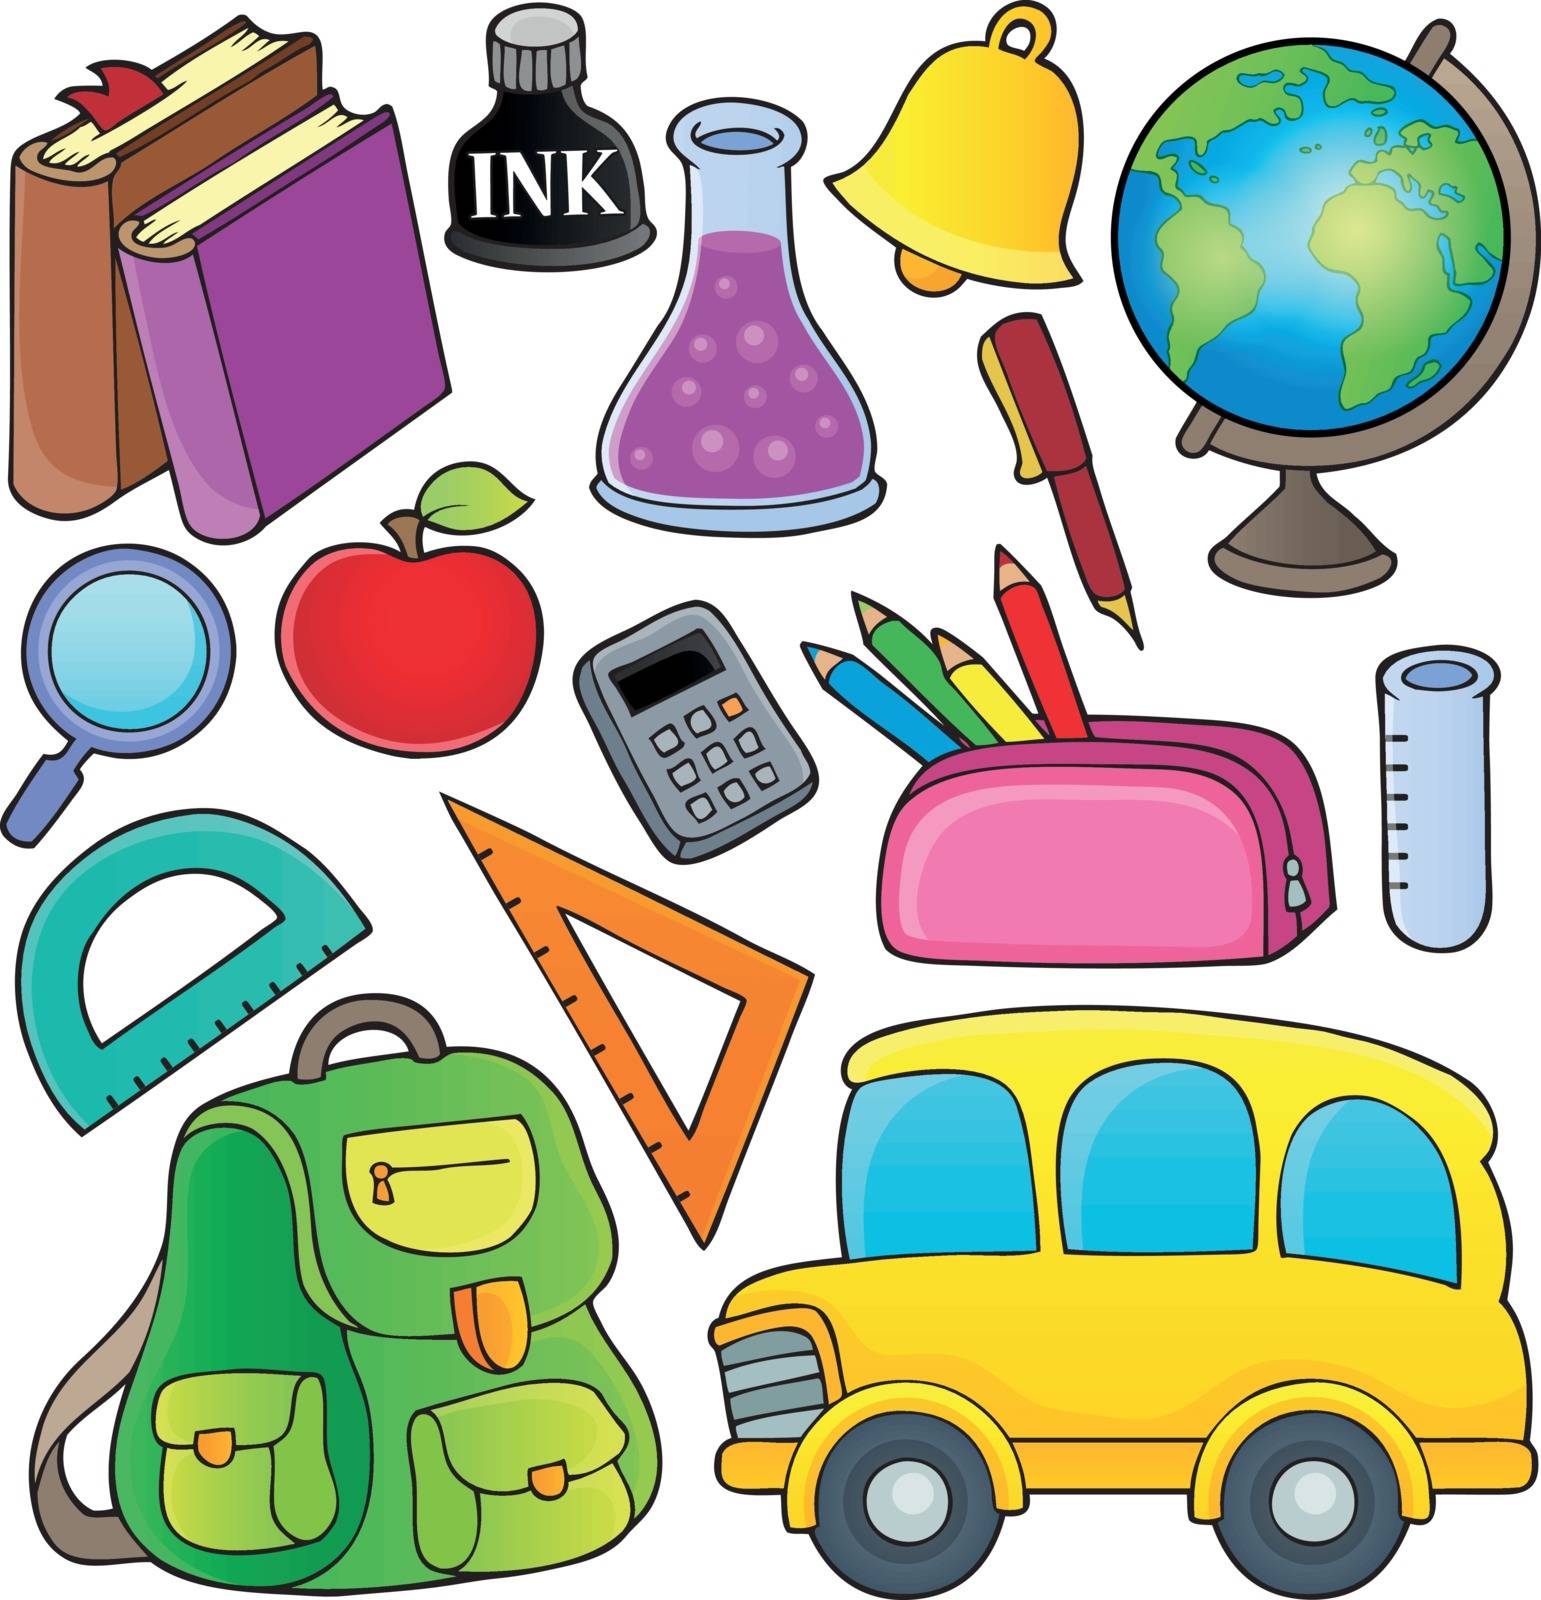 School related objects collection 1 - eps10 vector illustration.